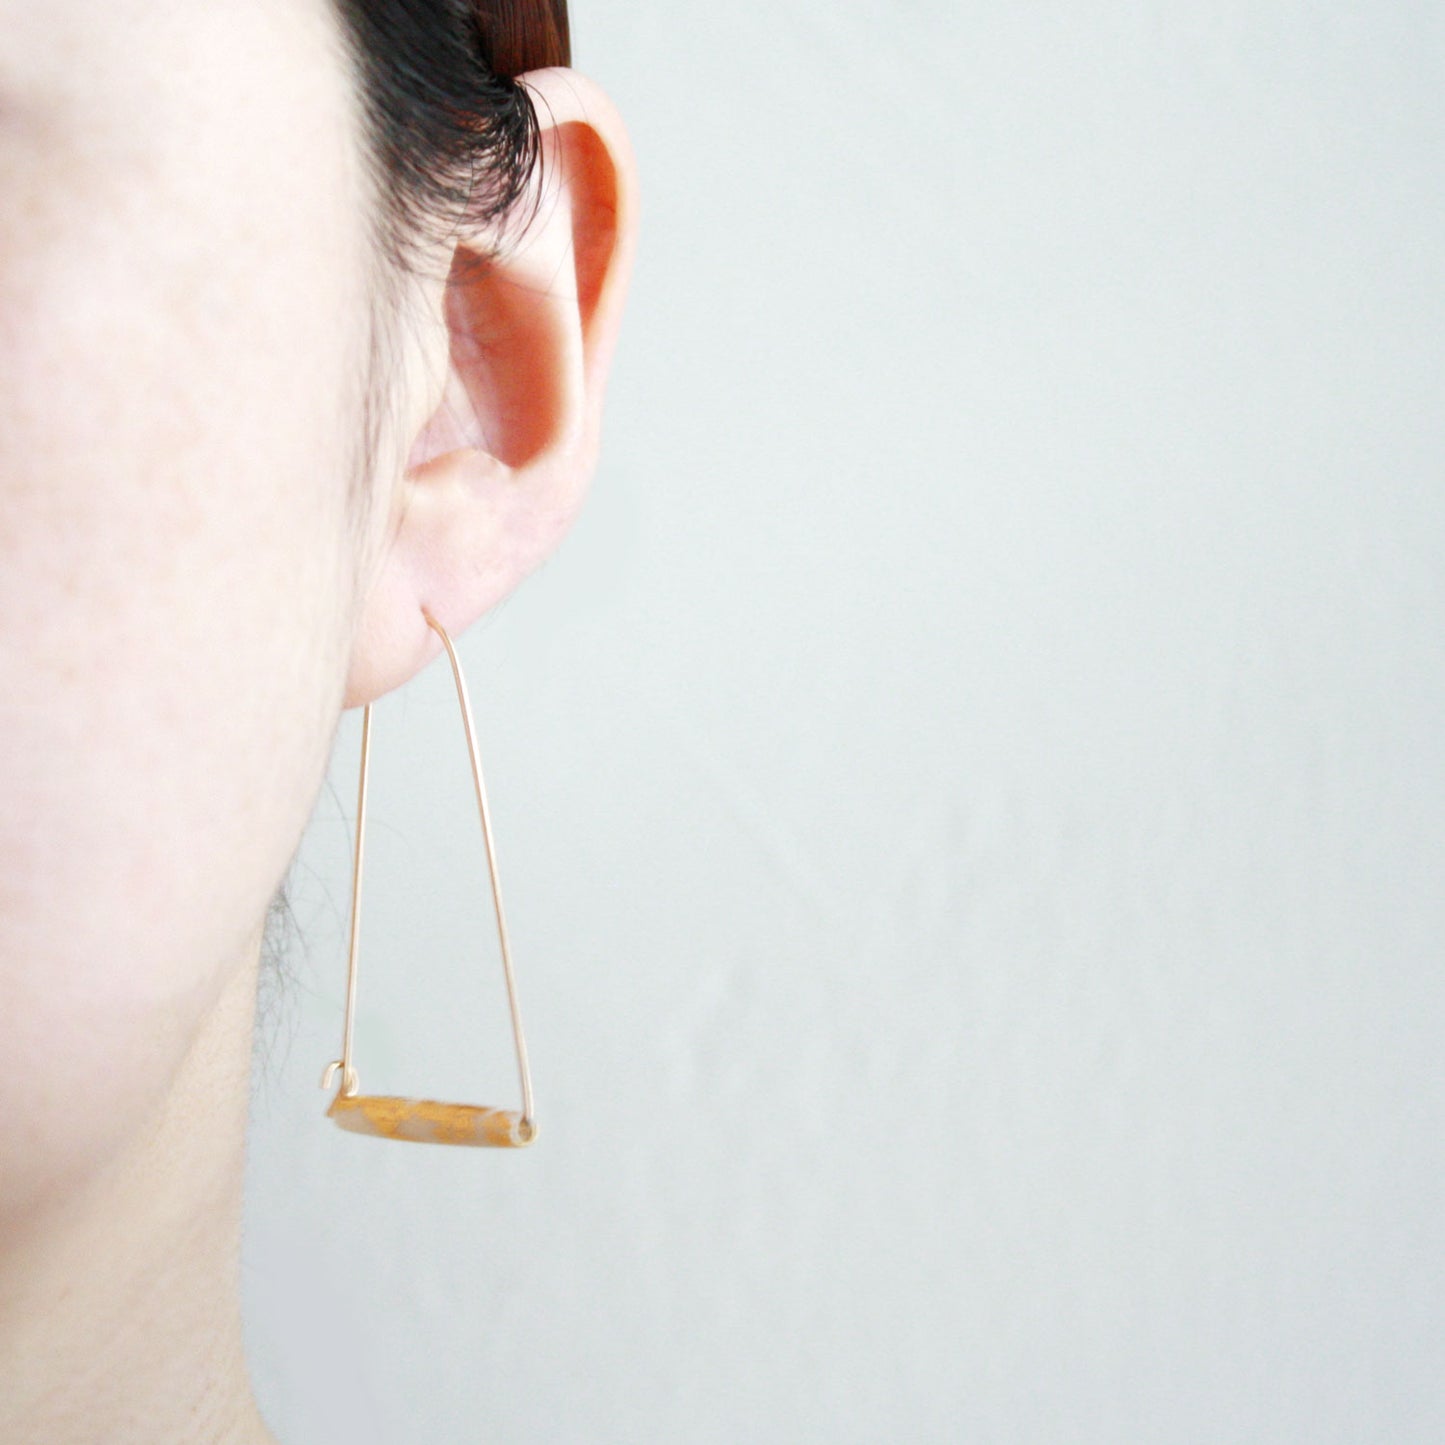 Large Mountain Hoop Earrings - Tubes with Gold Leaf